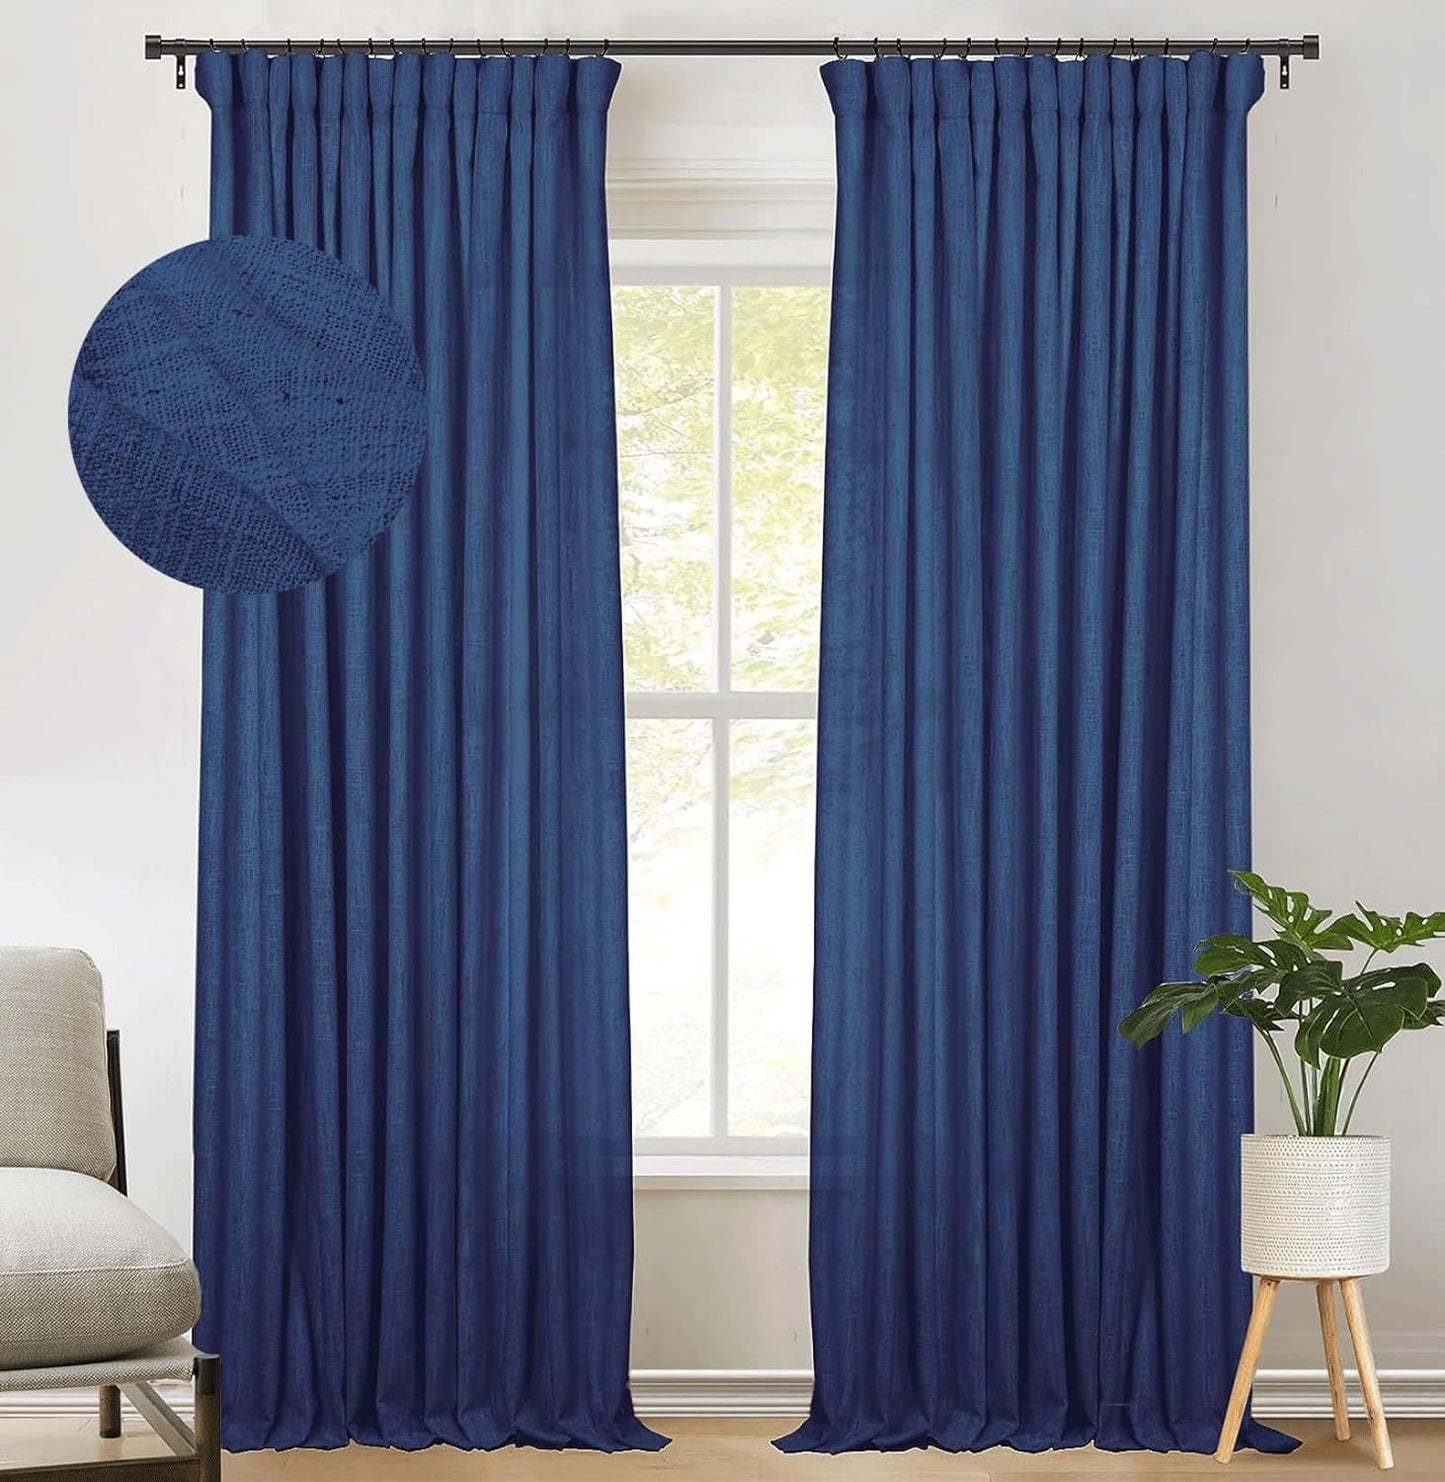 Zeerobee Beige White Linen Curtains for Living Room/Bedroom Linen Curtains 96 Inches Long 2 Panels Linen Drapes Farmhouse Pinch Pleated Curtains Light Filtering Privacy Curtains, W50 X L96  zeerobee 09 Navy 50"W X 84"L 